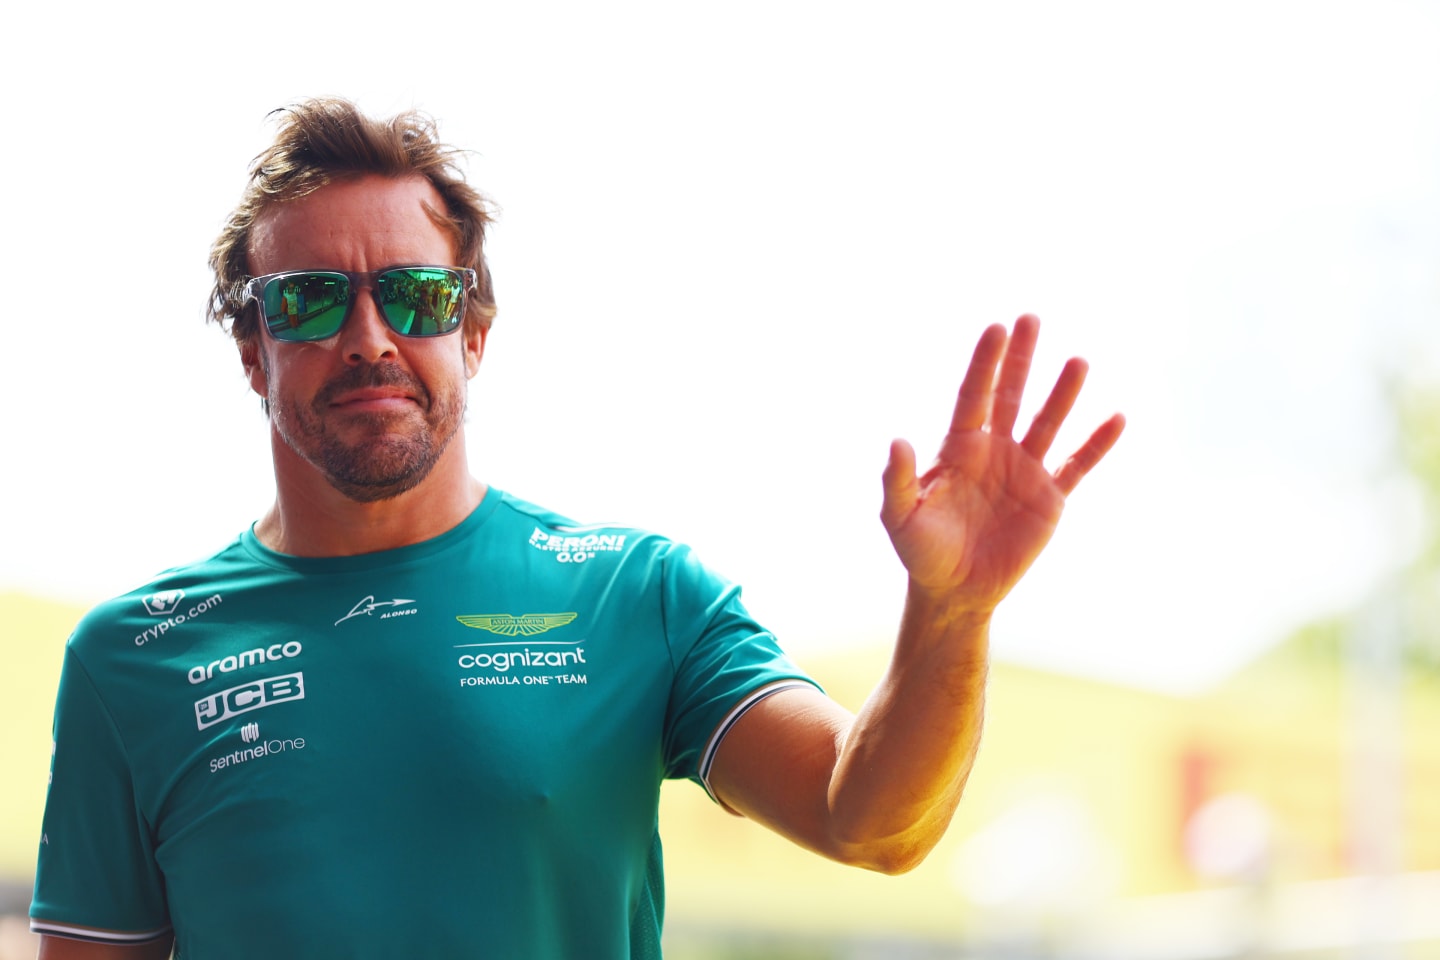 MONZA, ITALY - SEPTEMBER 03: Fernando Alonso of Spain and Aston Martin F1 Team waves to the crowd